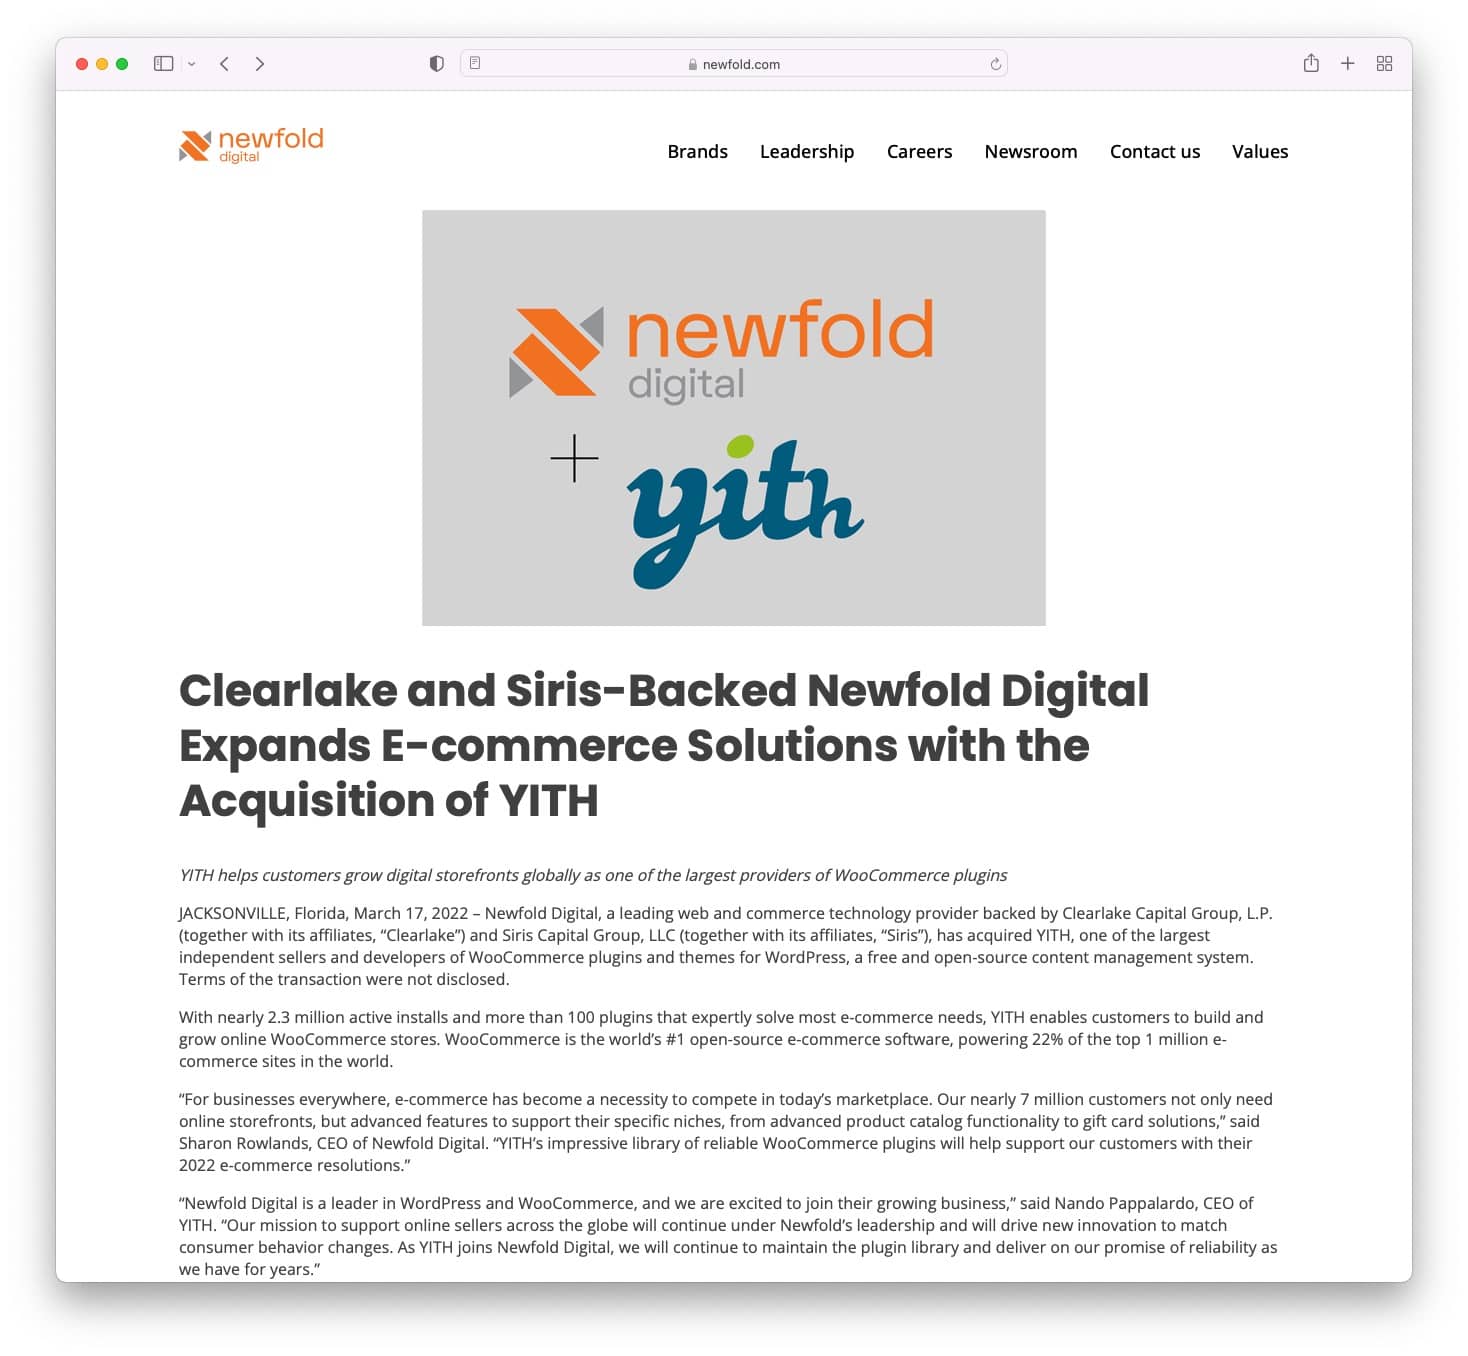 Newfold Digital acquires YITH